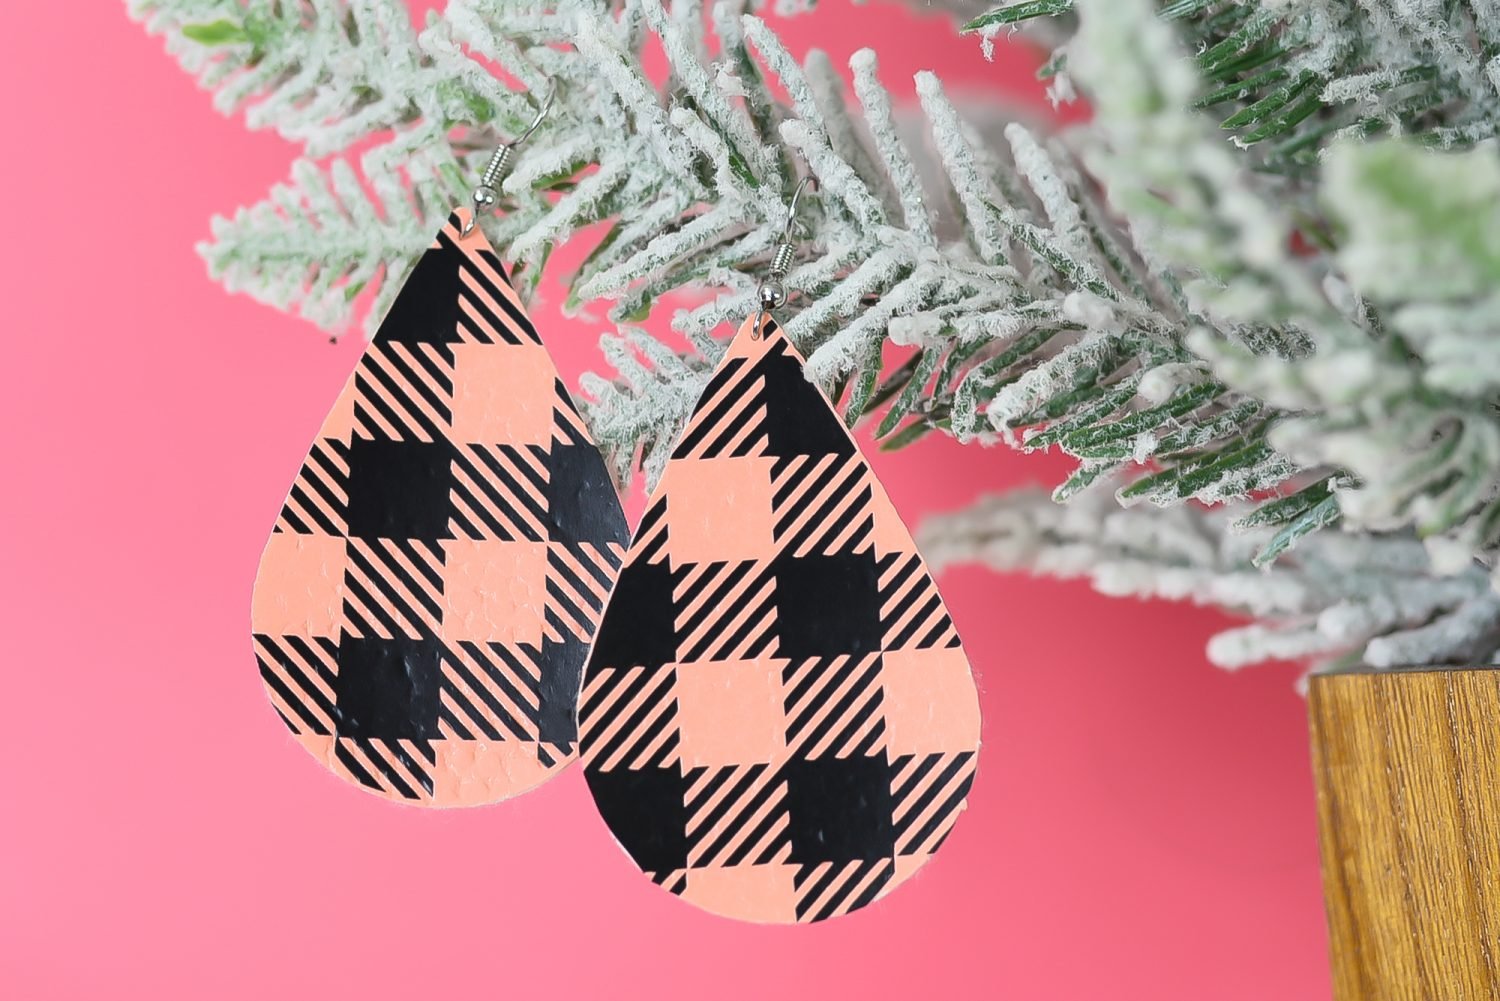 Finished pinkbuffalo plaid earrings hanging from a christmas tree branch